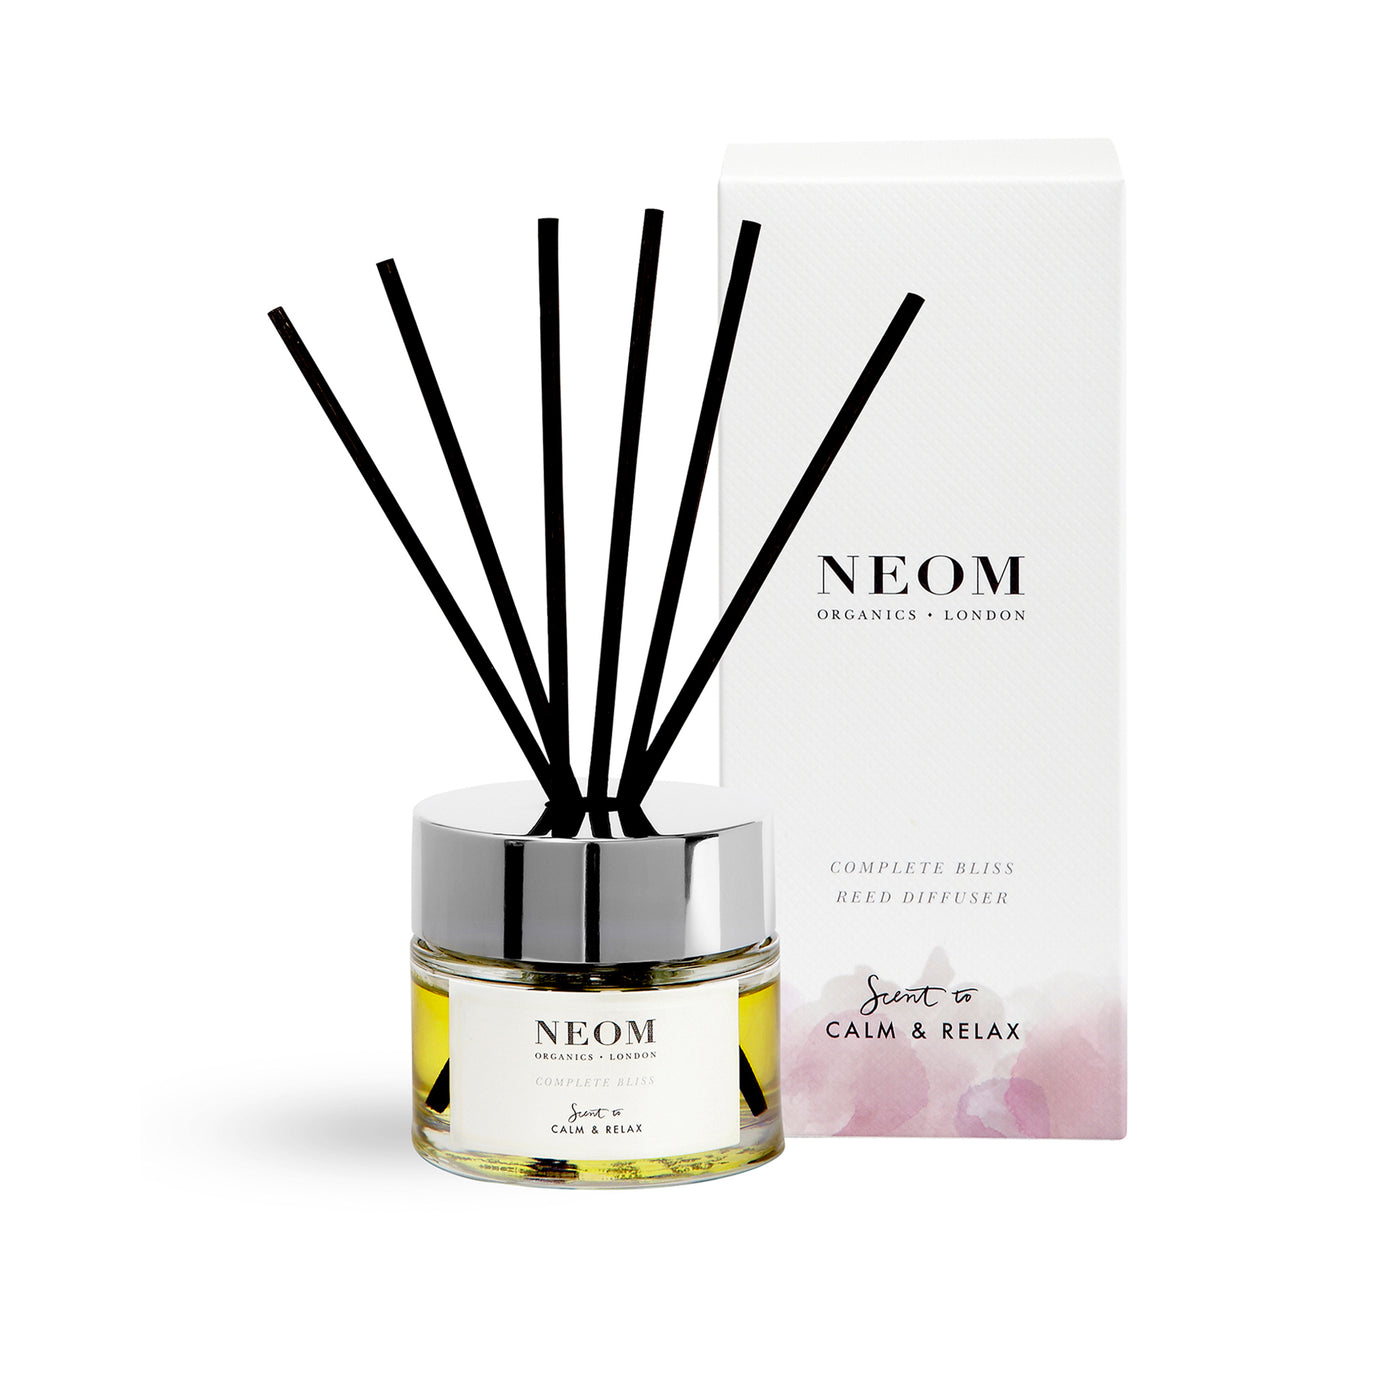 NEOM Organics - Complete Bliss Reed Diffuser